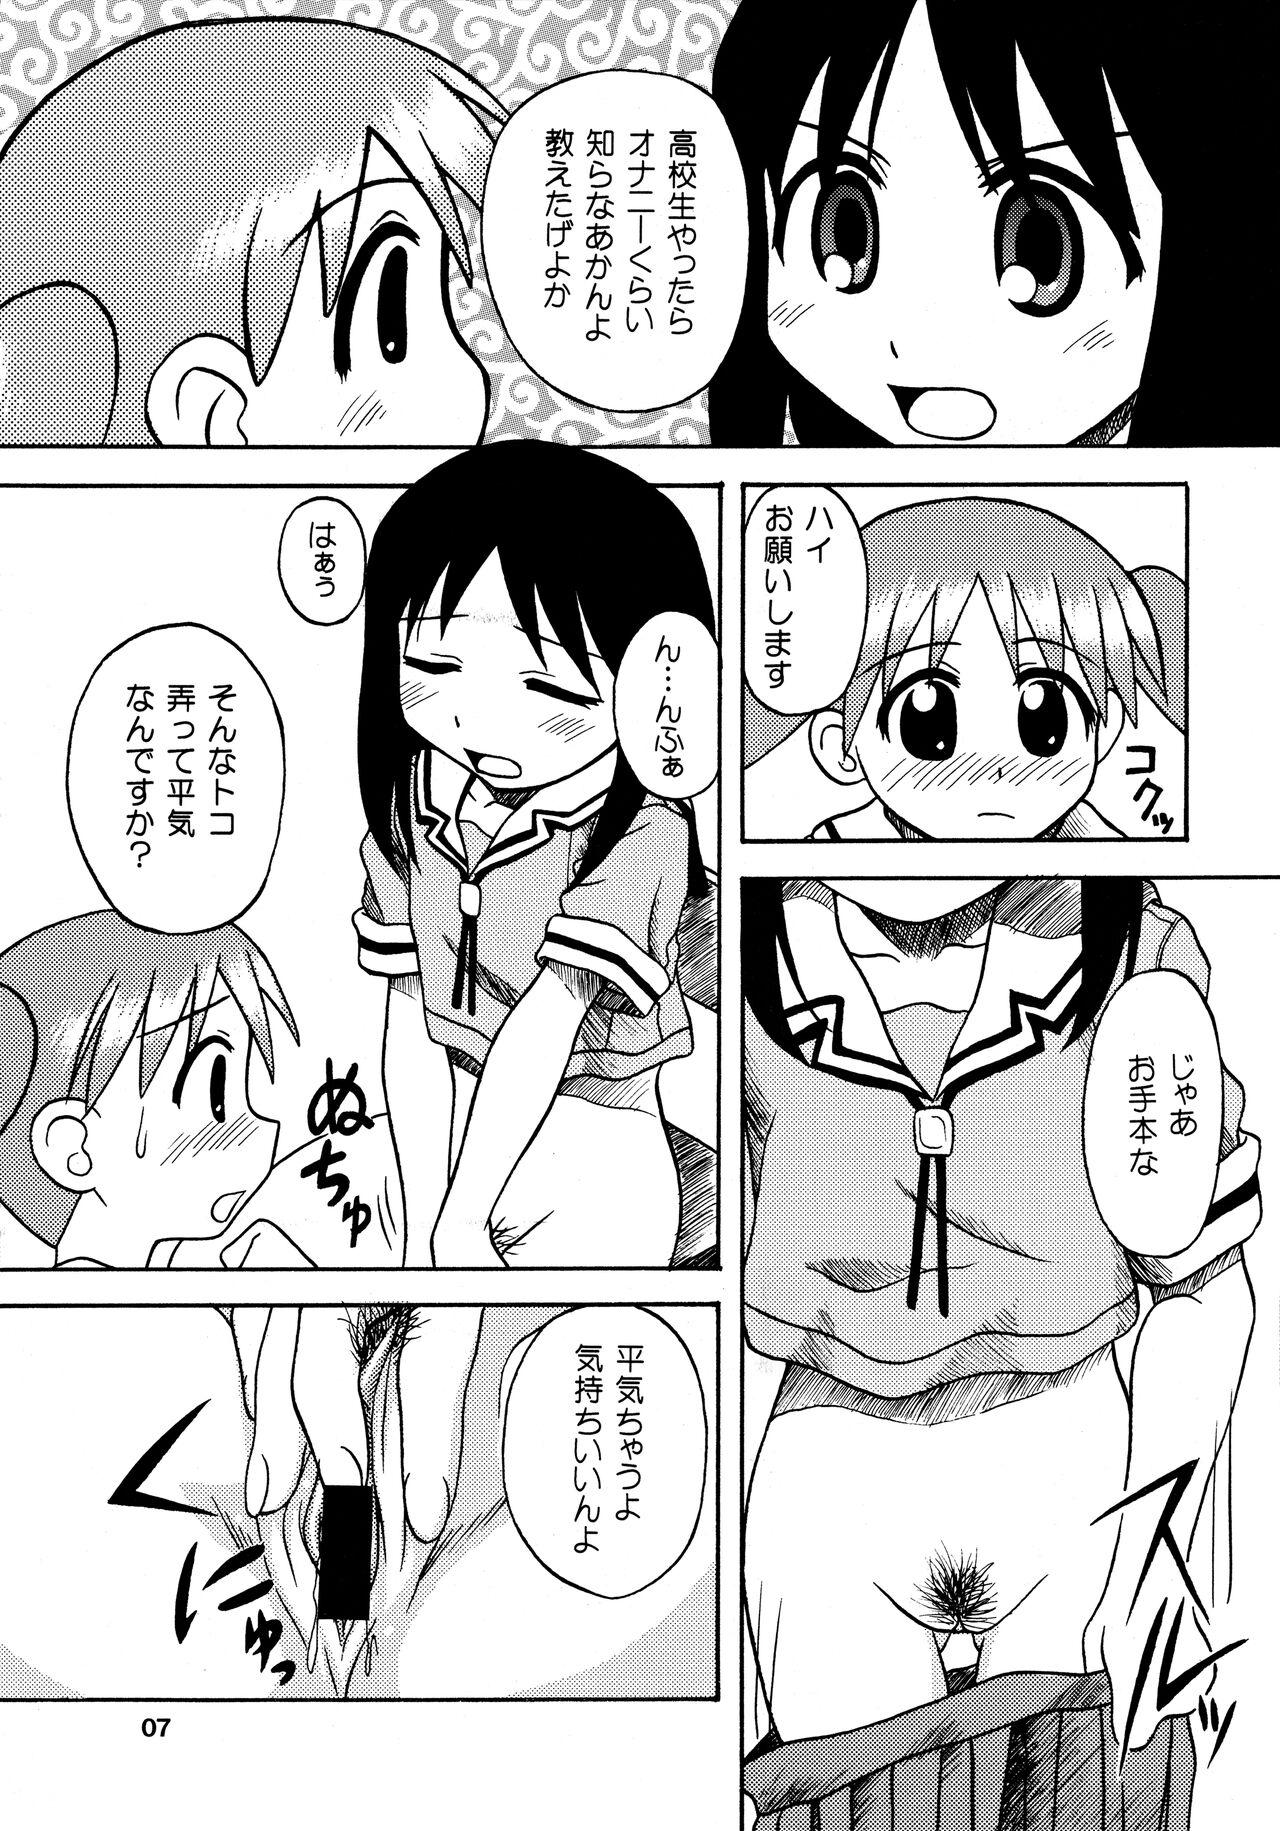 Hood ANOTHER LIFE - Azumanga daioh Pack - Page 7